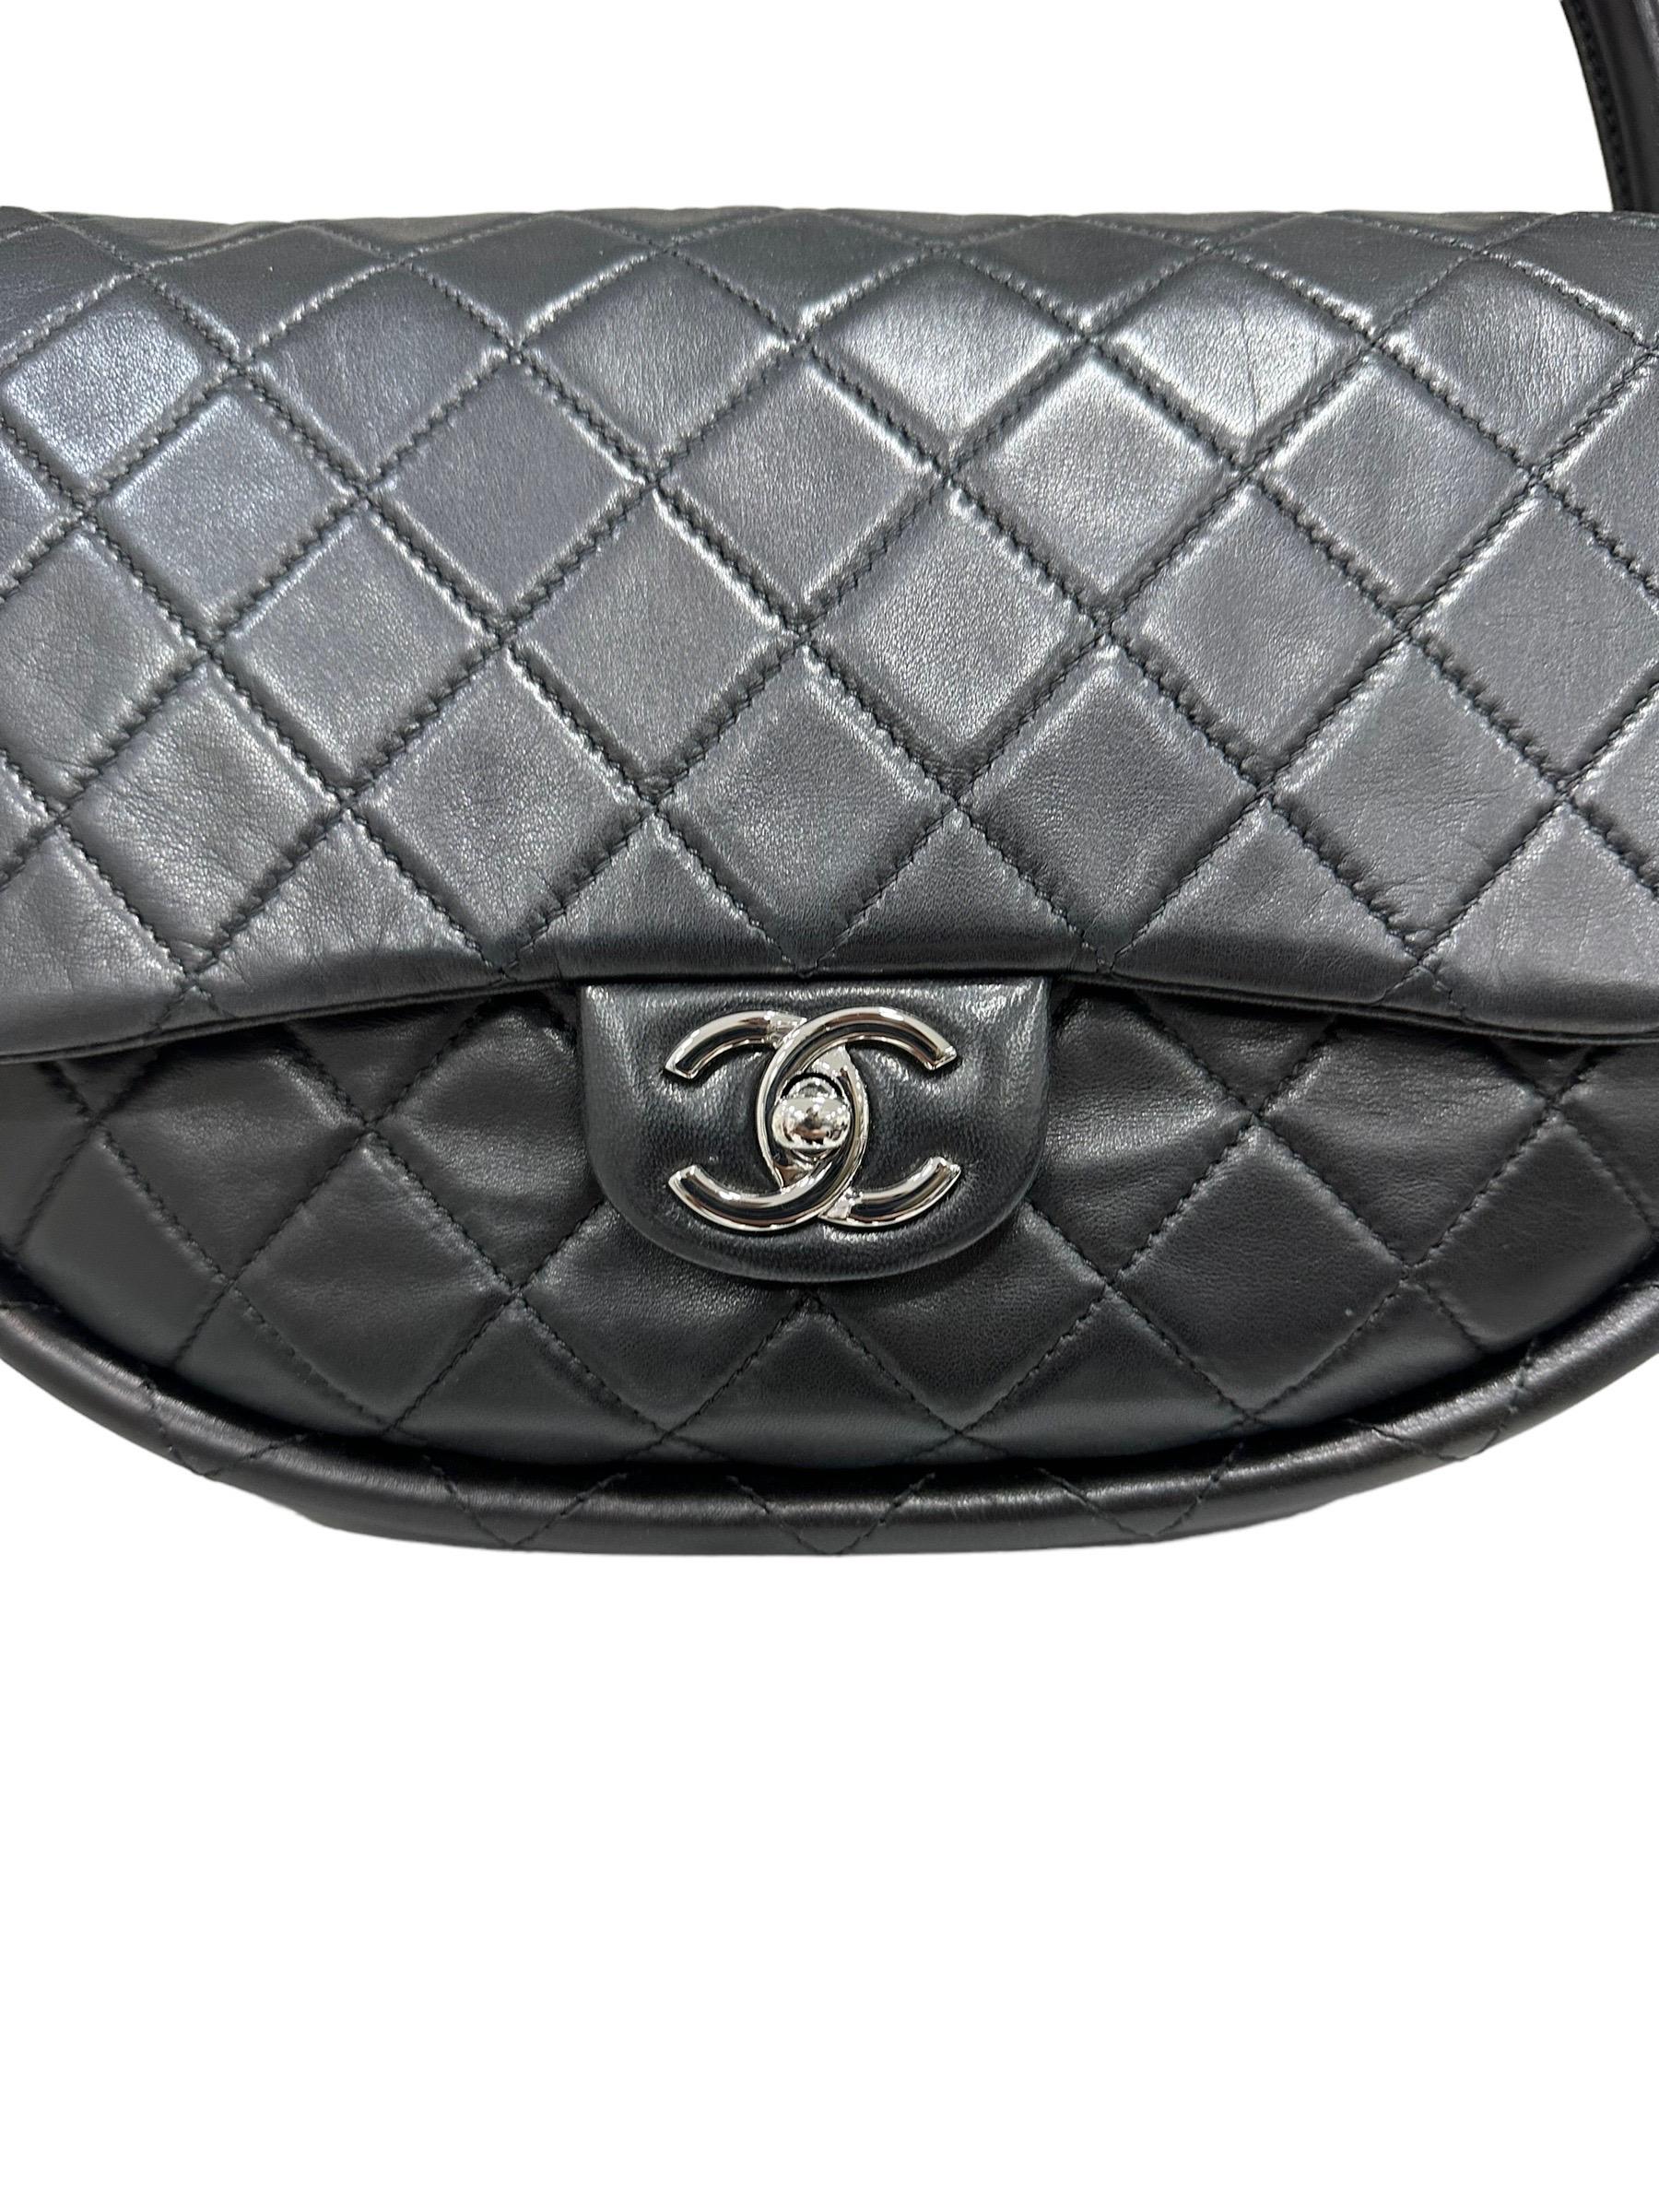 From the 2013 Spring collection there was this rare bag. Black quilted leather Chanel mini Hula Hoop bag with single interior zip pocket, structured top handles and front flap and CC turn-lock closure . Excellent condition for this unique and